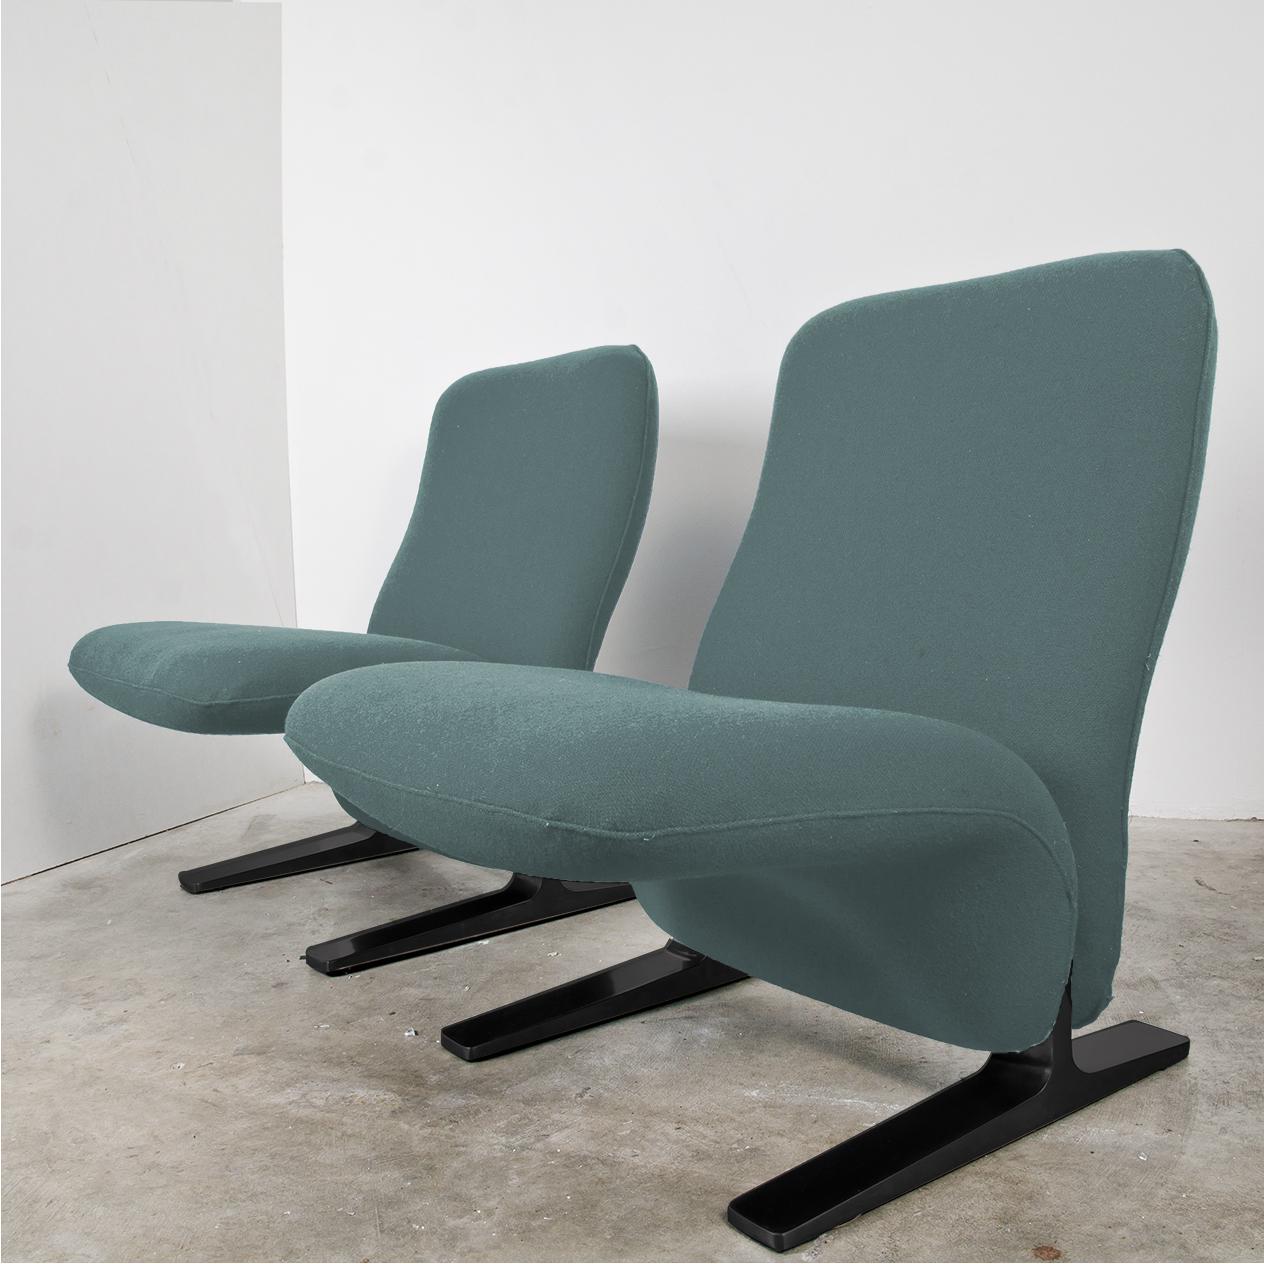 Mid-20th Century Dutch Lounge Chairs by Pierre Paulin for Artifort, New Kvadrat Upholstery, 1970s